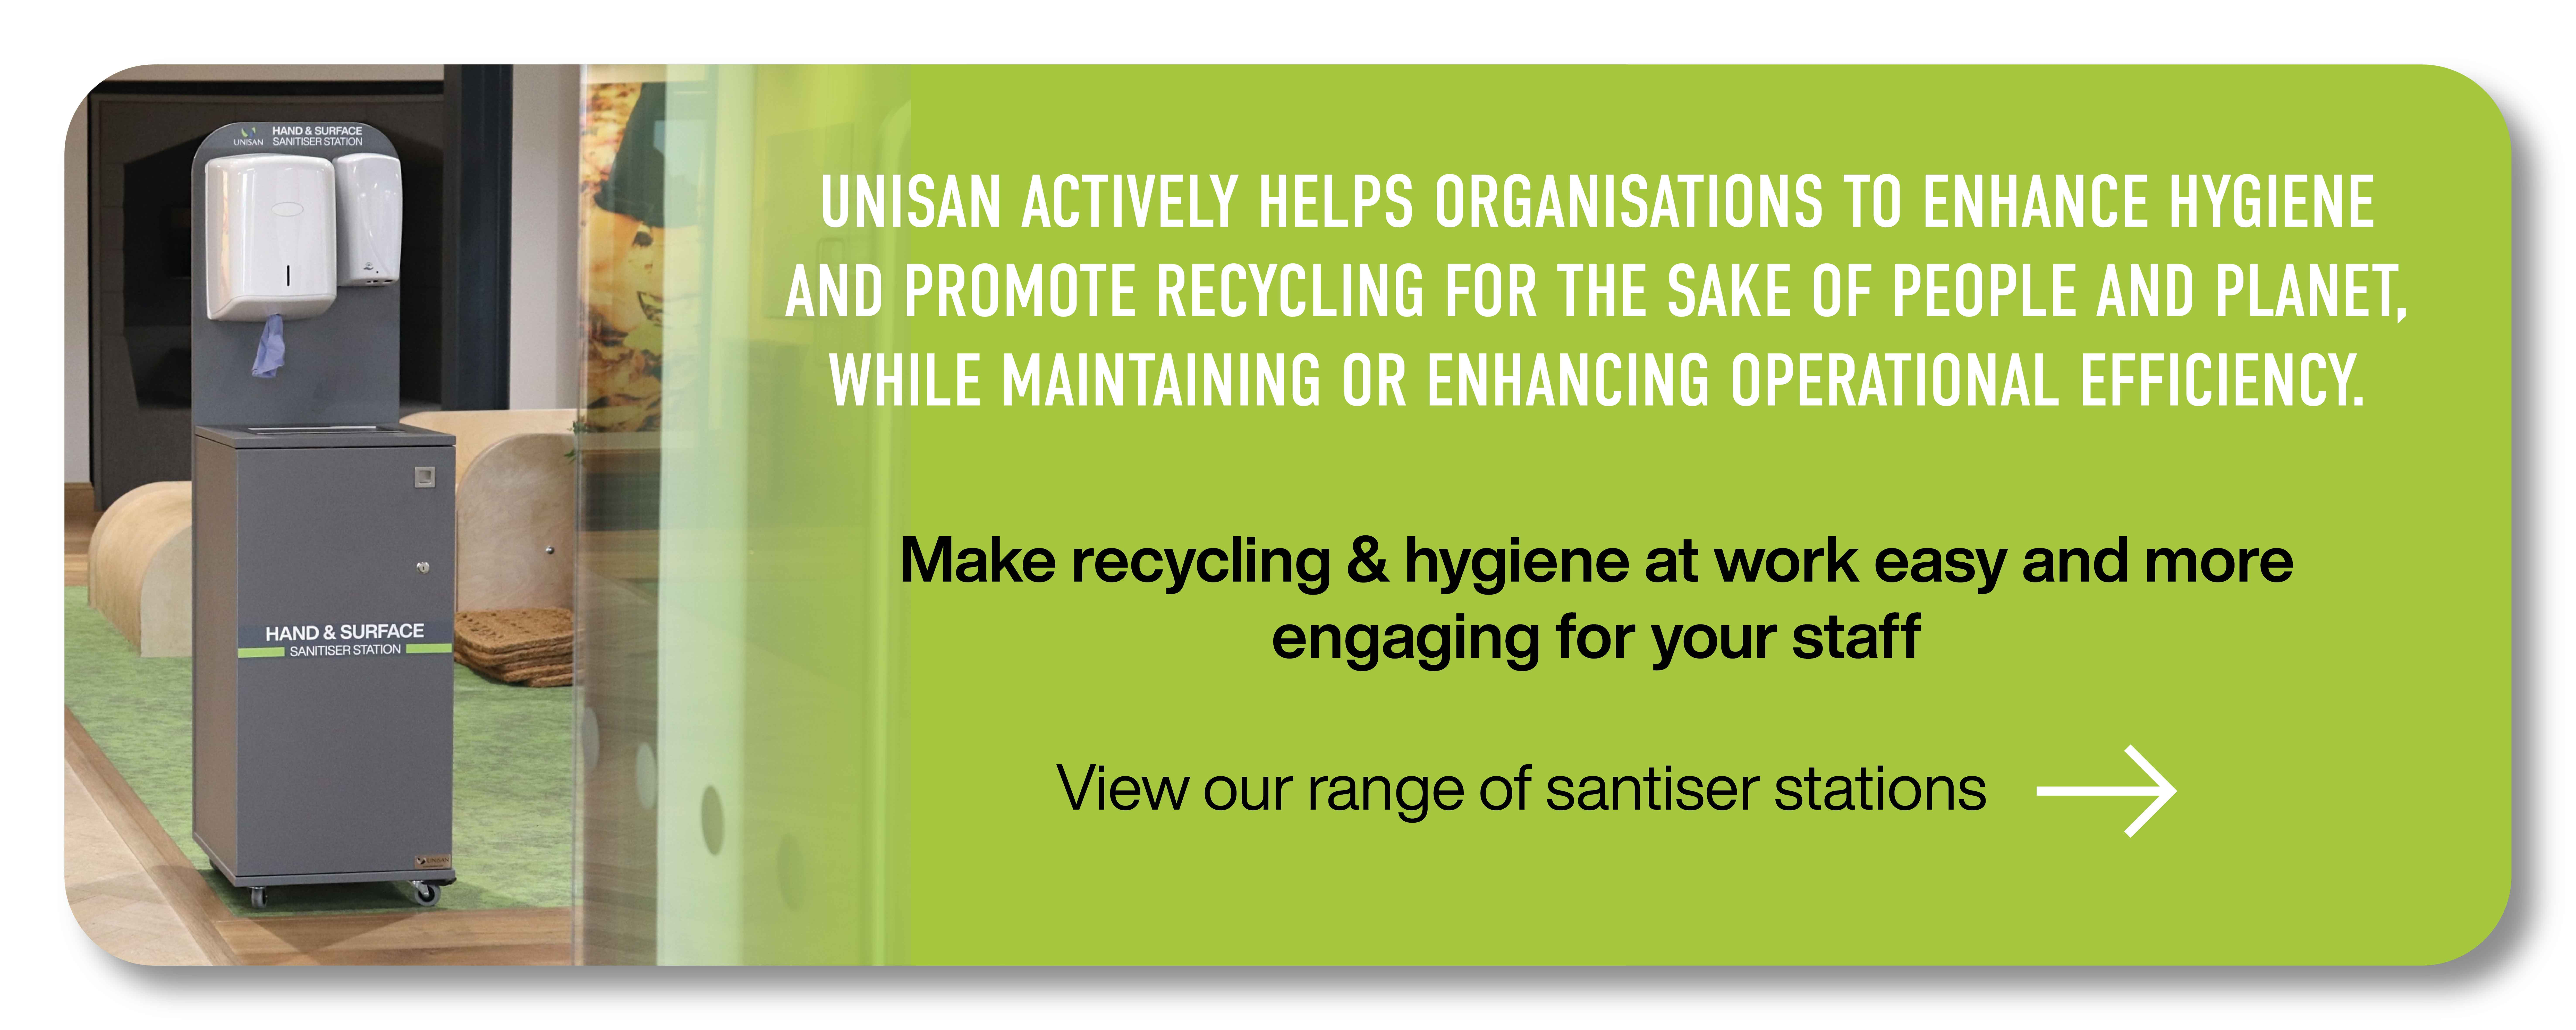 cleaner and greener workplace